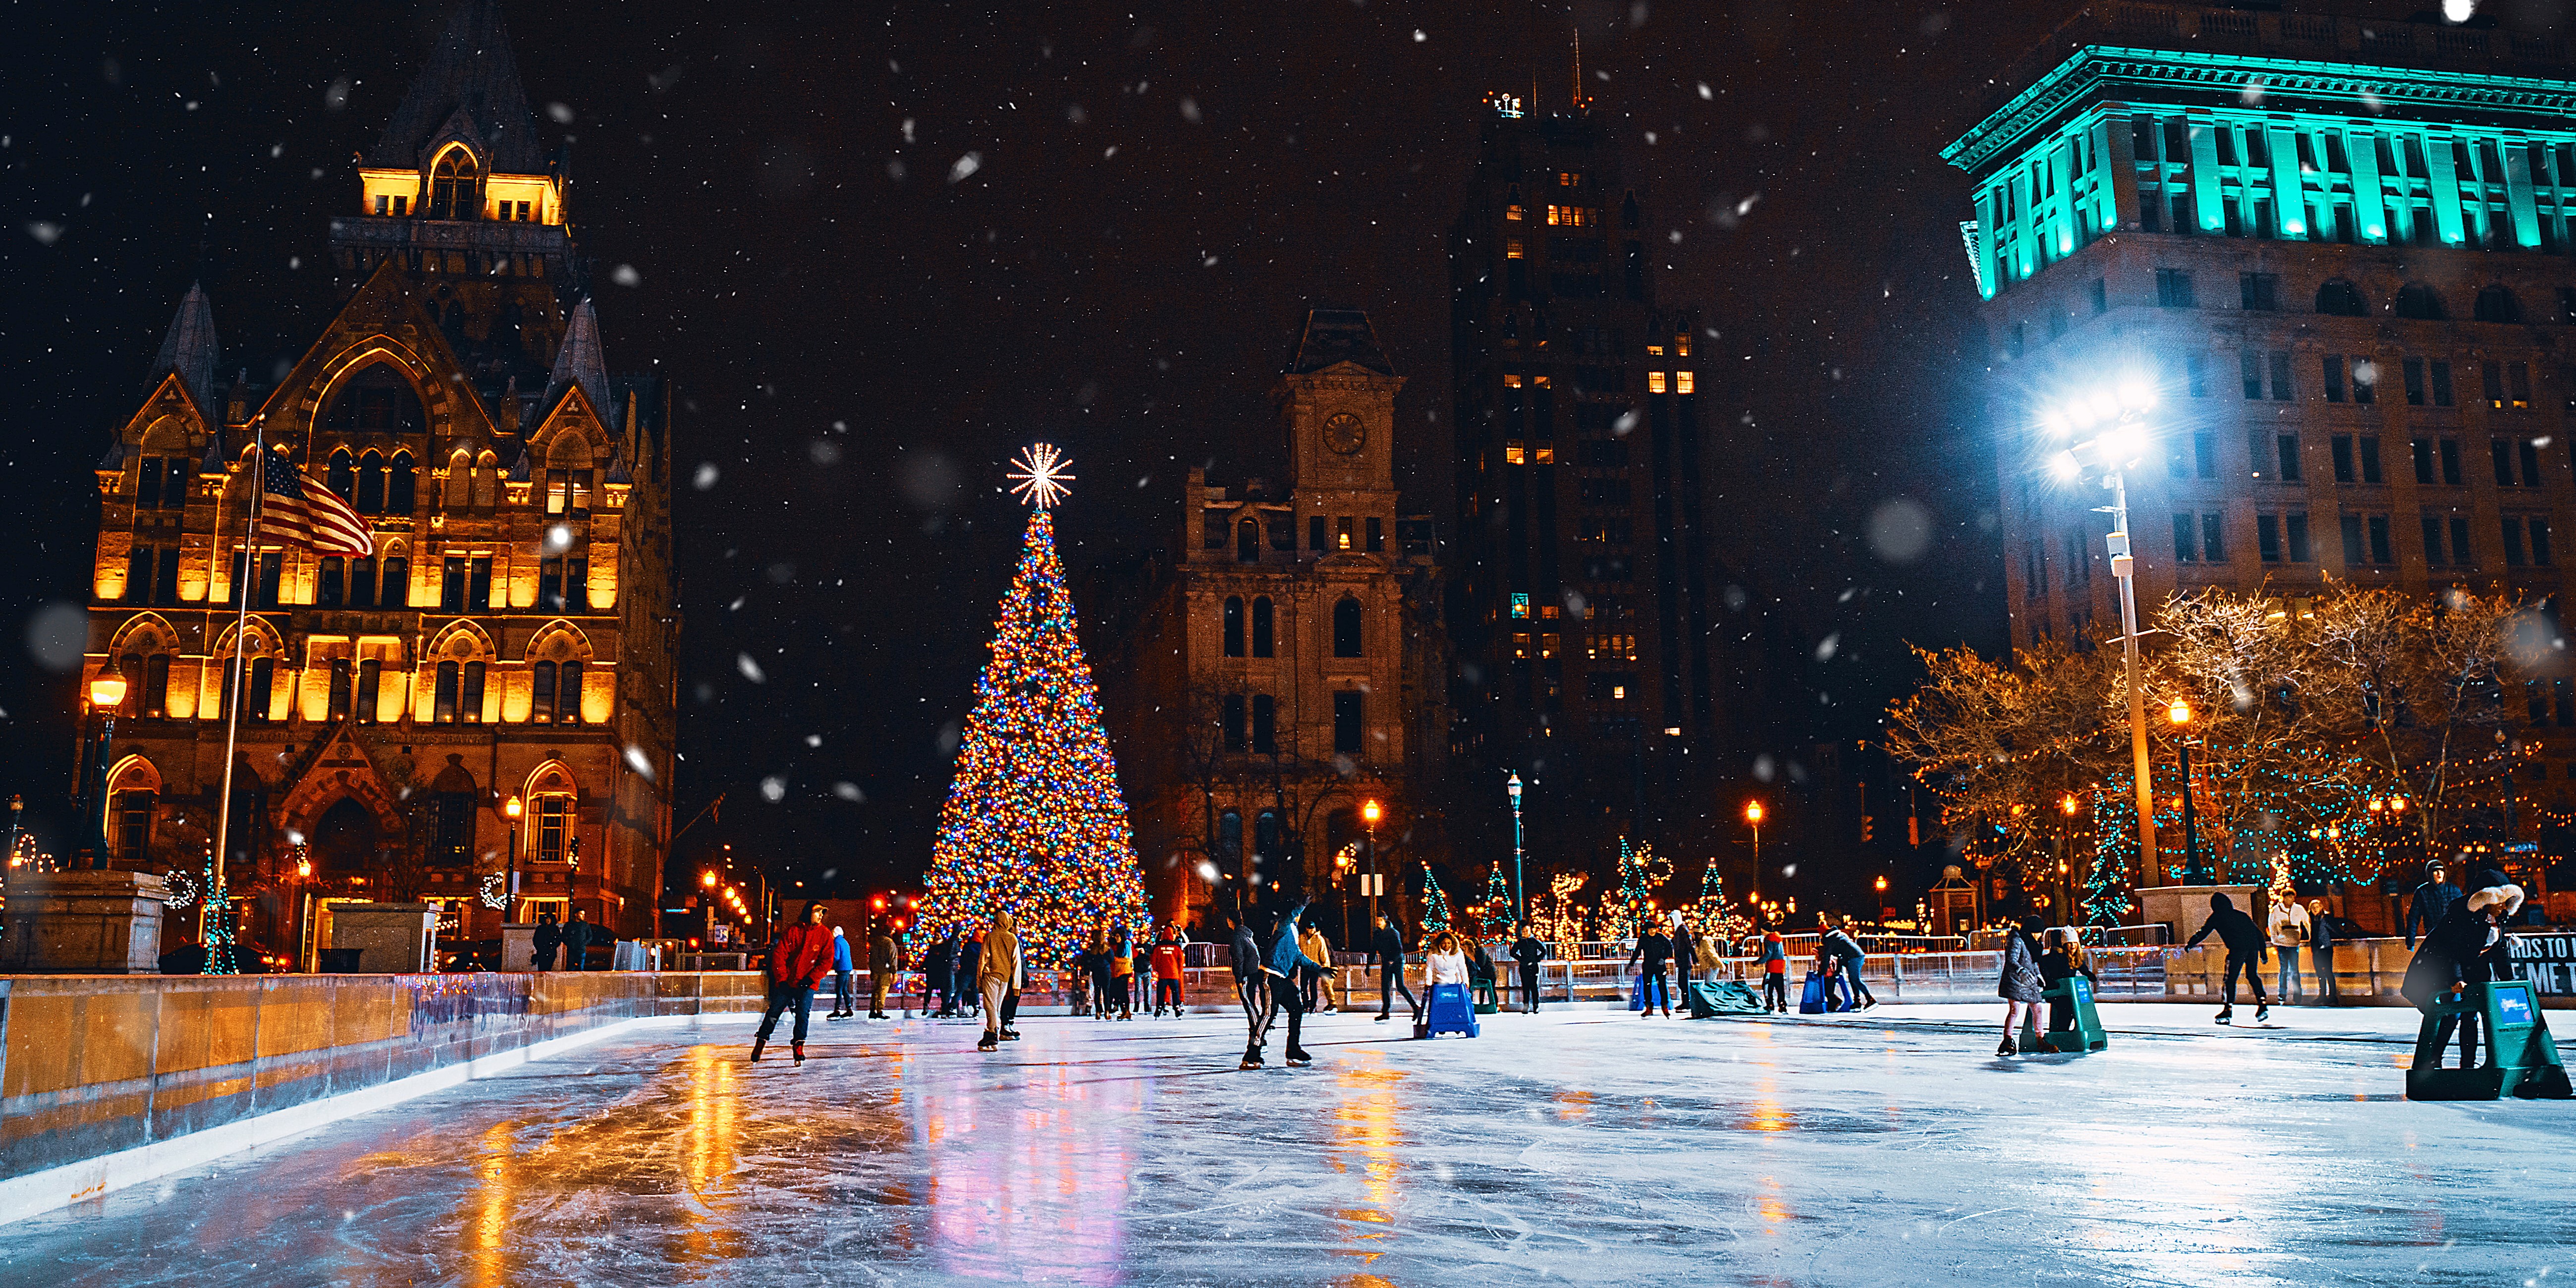 Clinton Square Ice Rink at Night